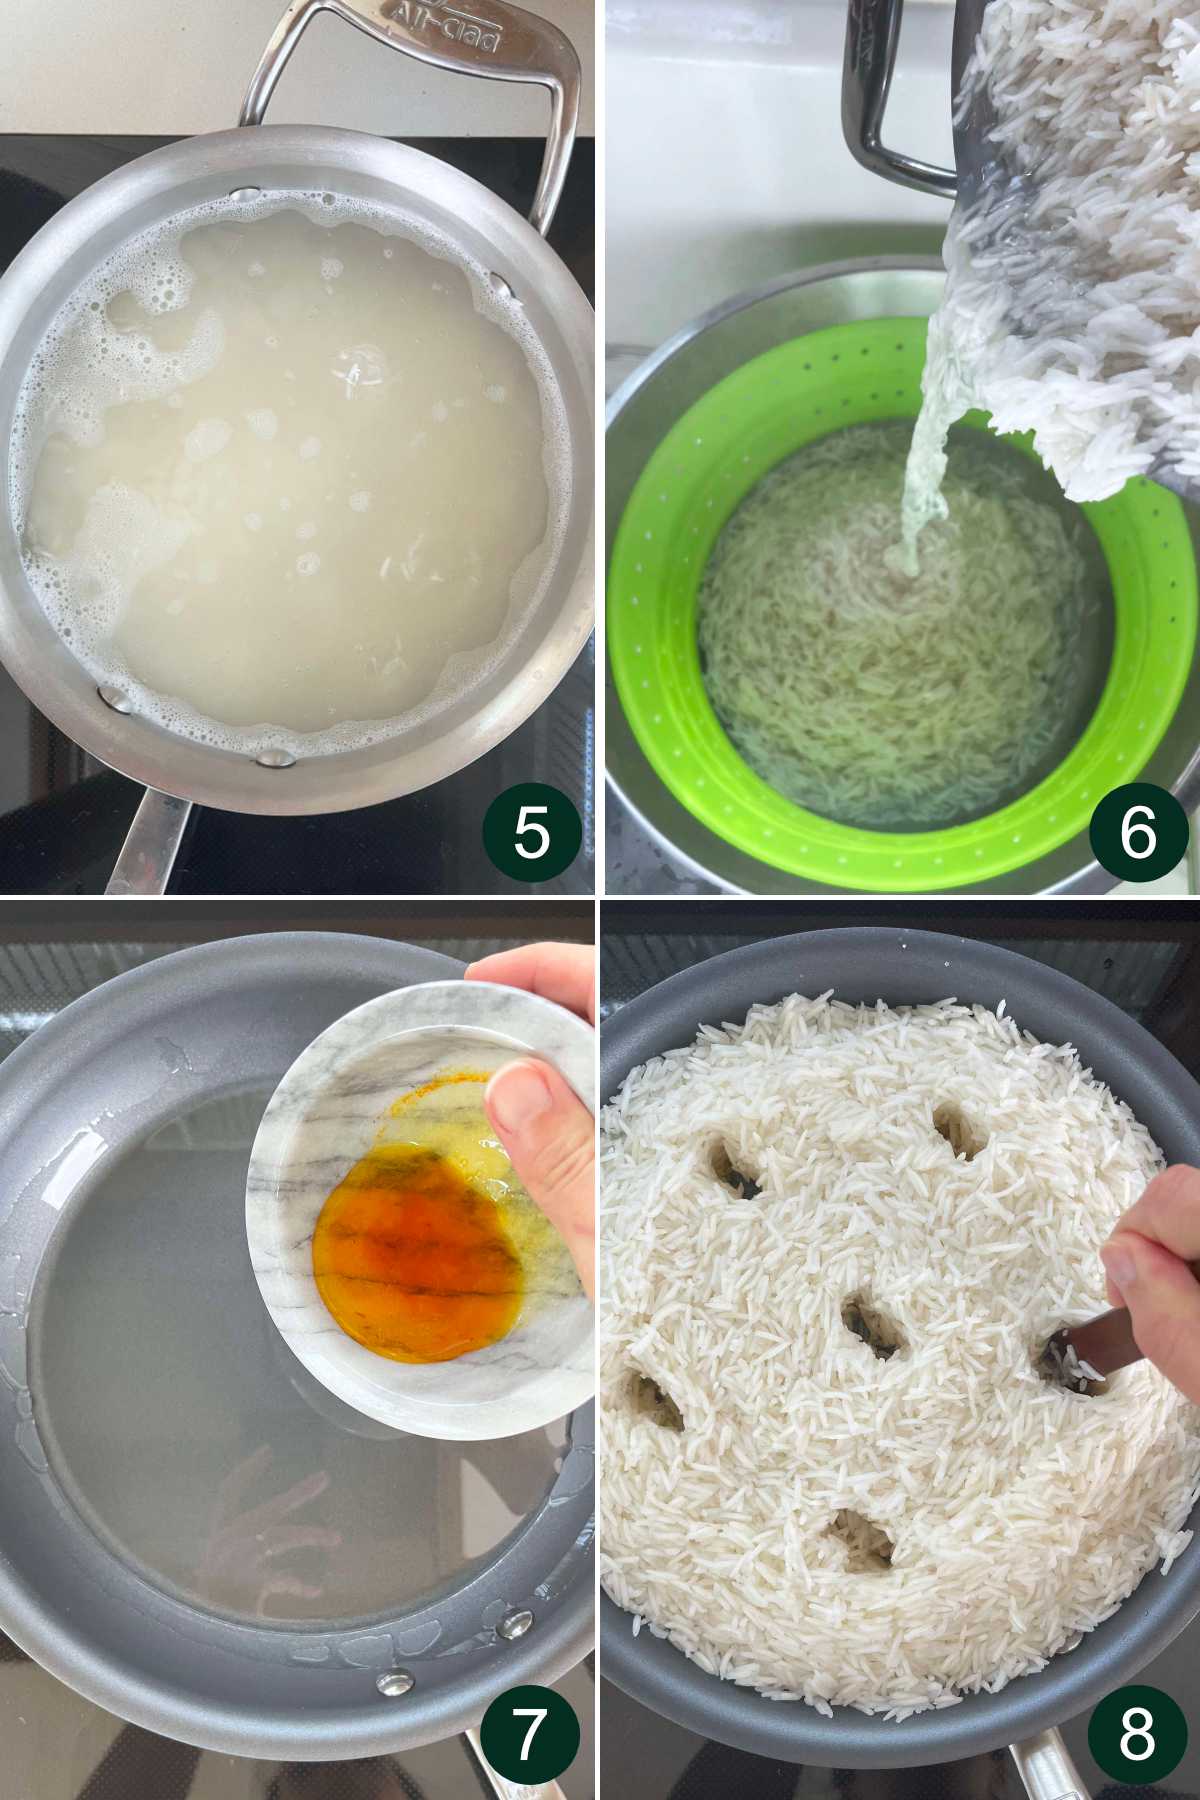 Cooking, straining, and adding rice to a fry pan with oil and saffron.